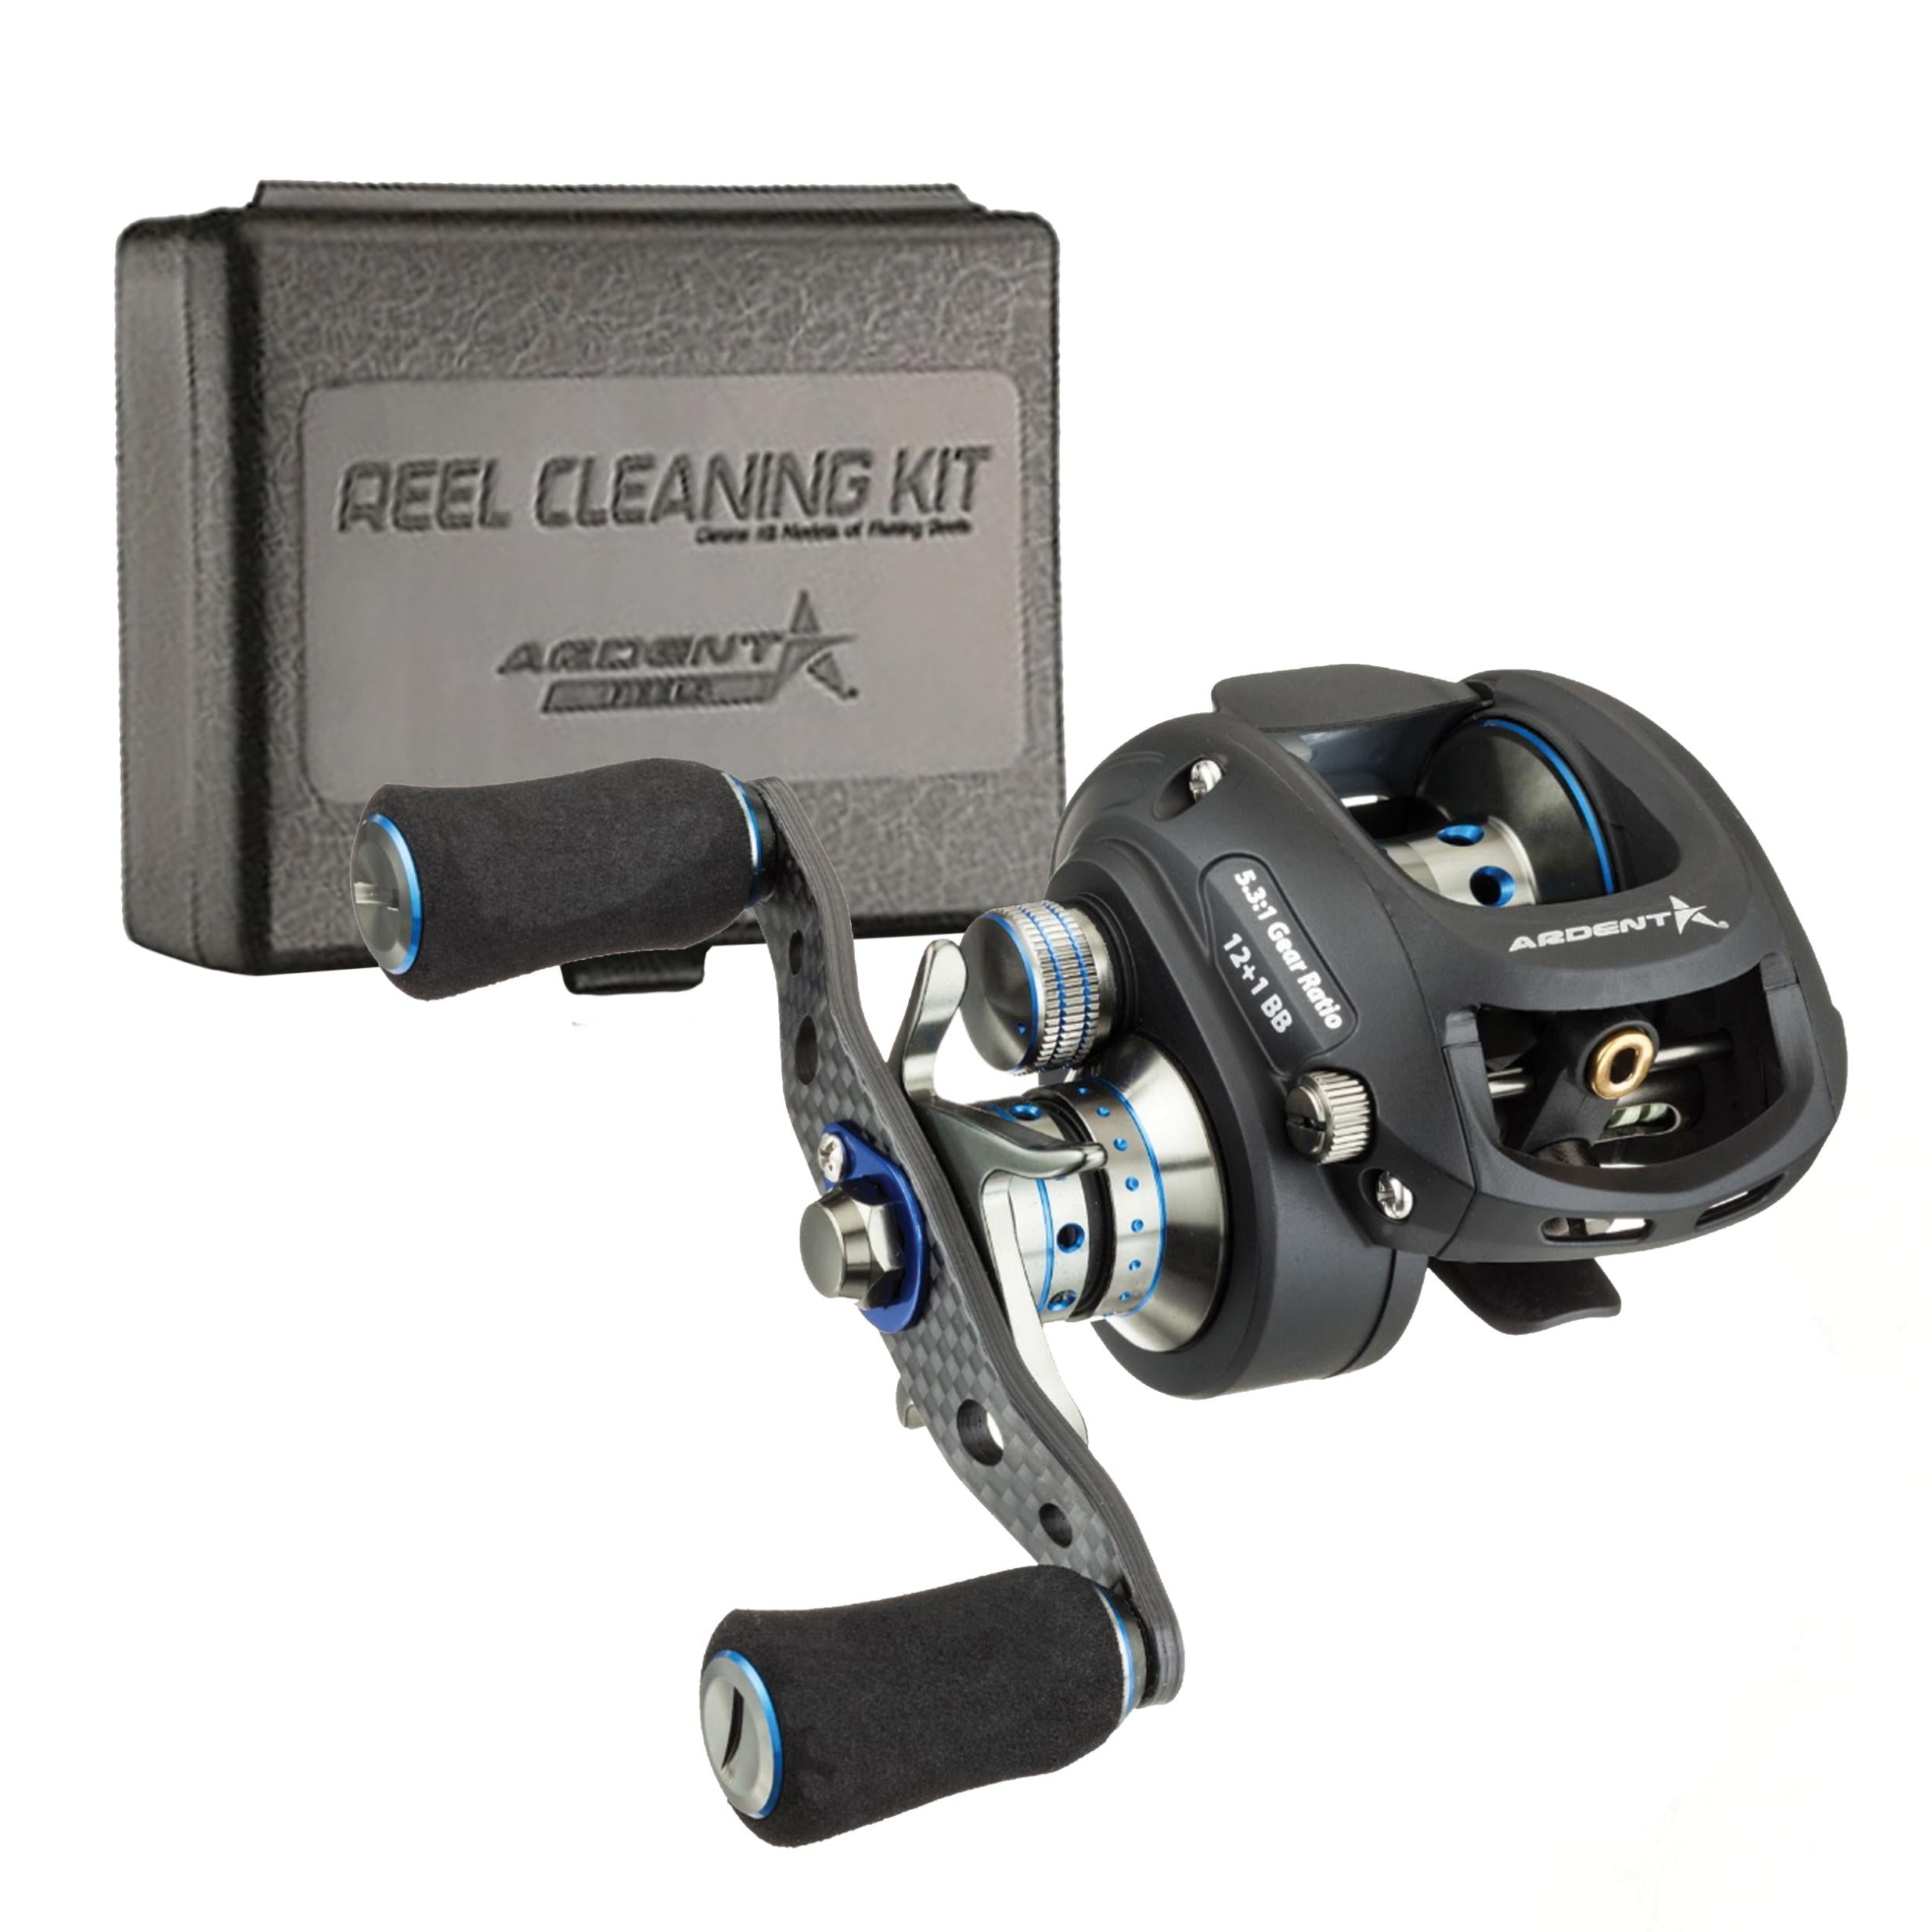 Ardent Apex Elite Reel and Cleaning Kit Bundle – The Infidel Co